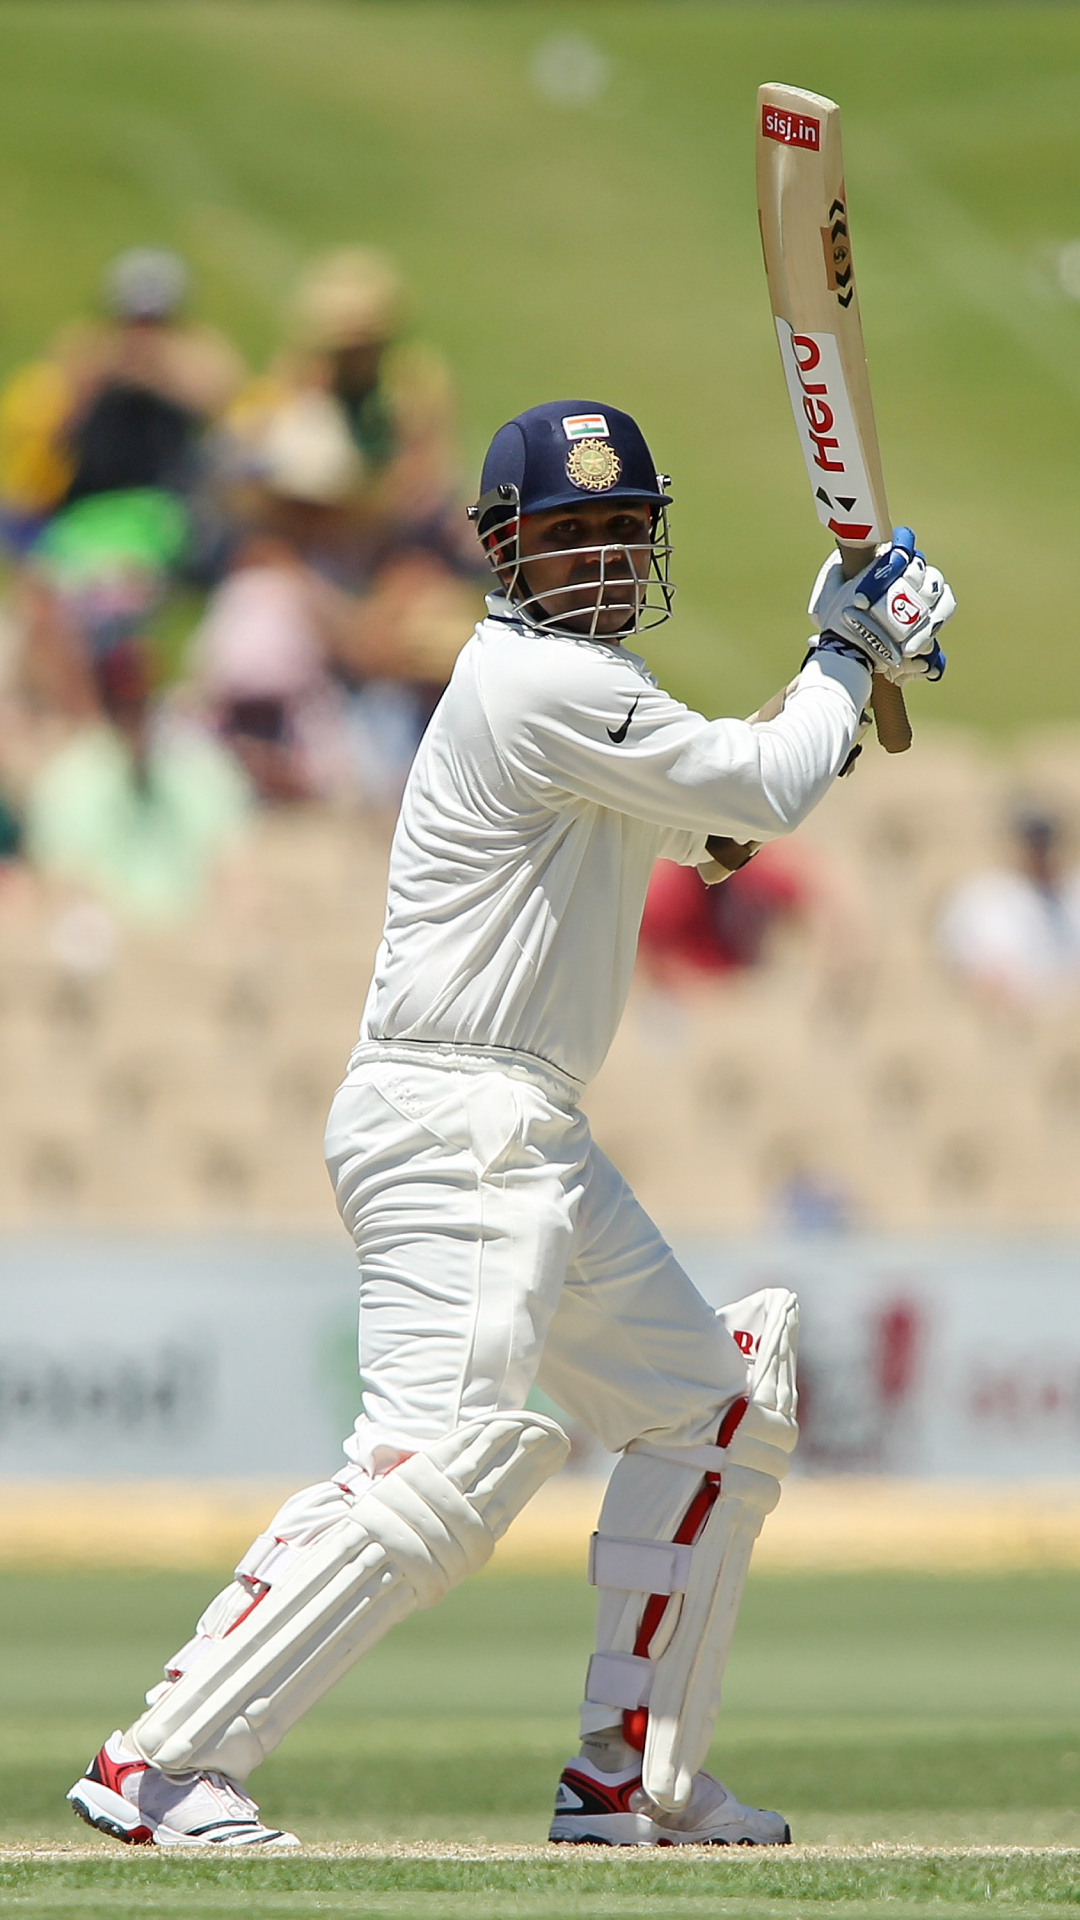 From Sehwag to AB de Villiers top players to miss triple century in Tests by shortest margin